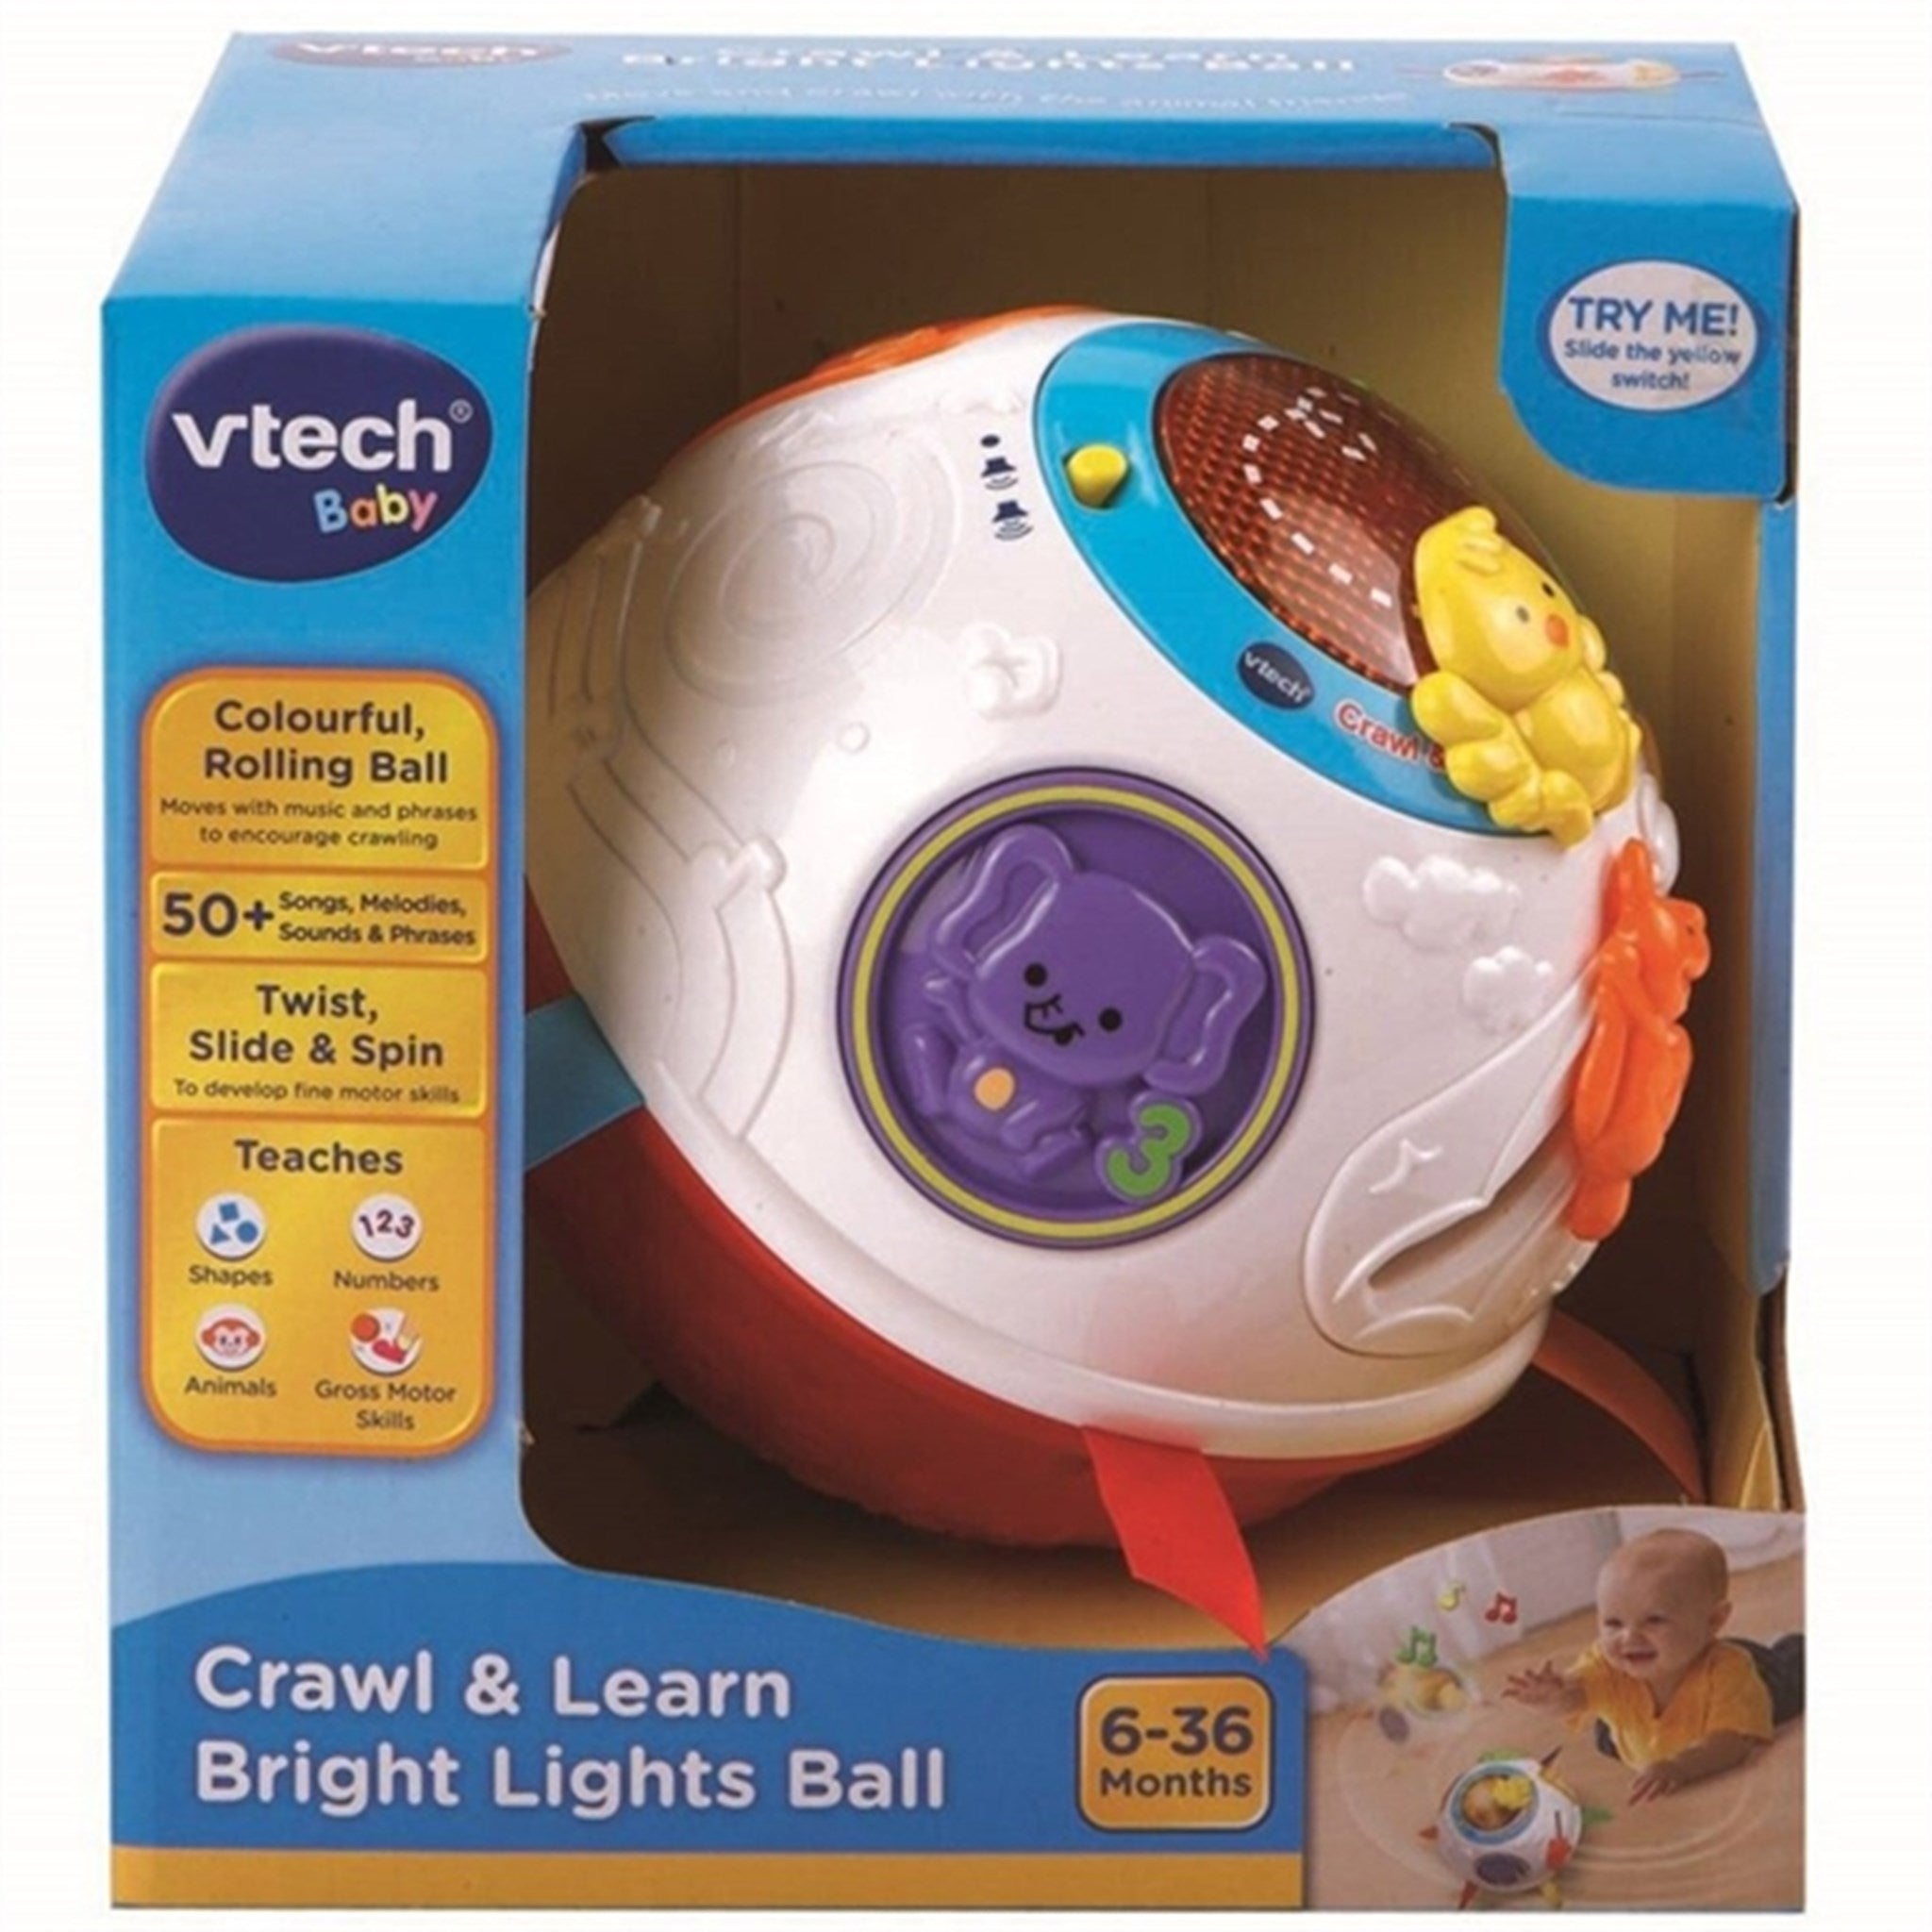 Vtech Baby Learning Toy